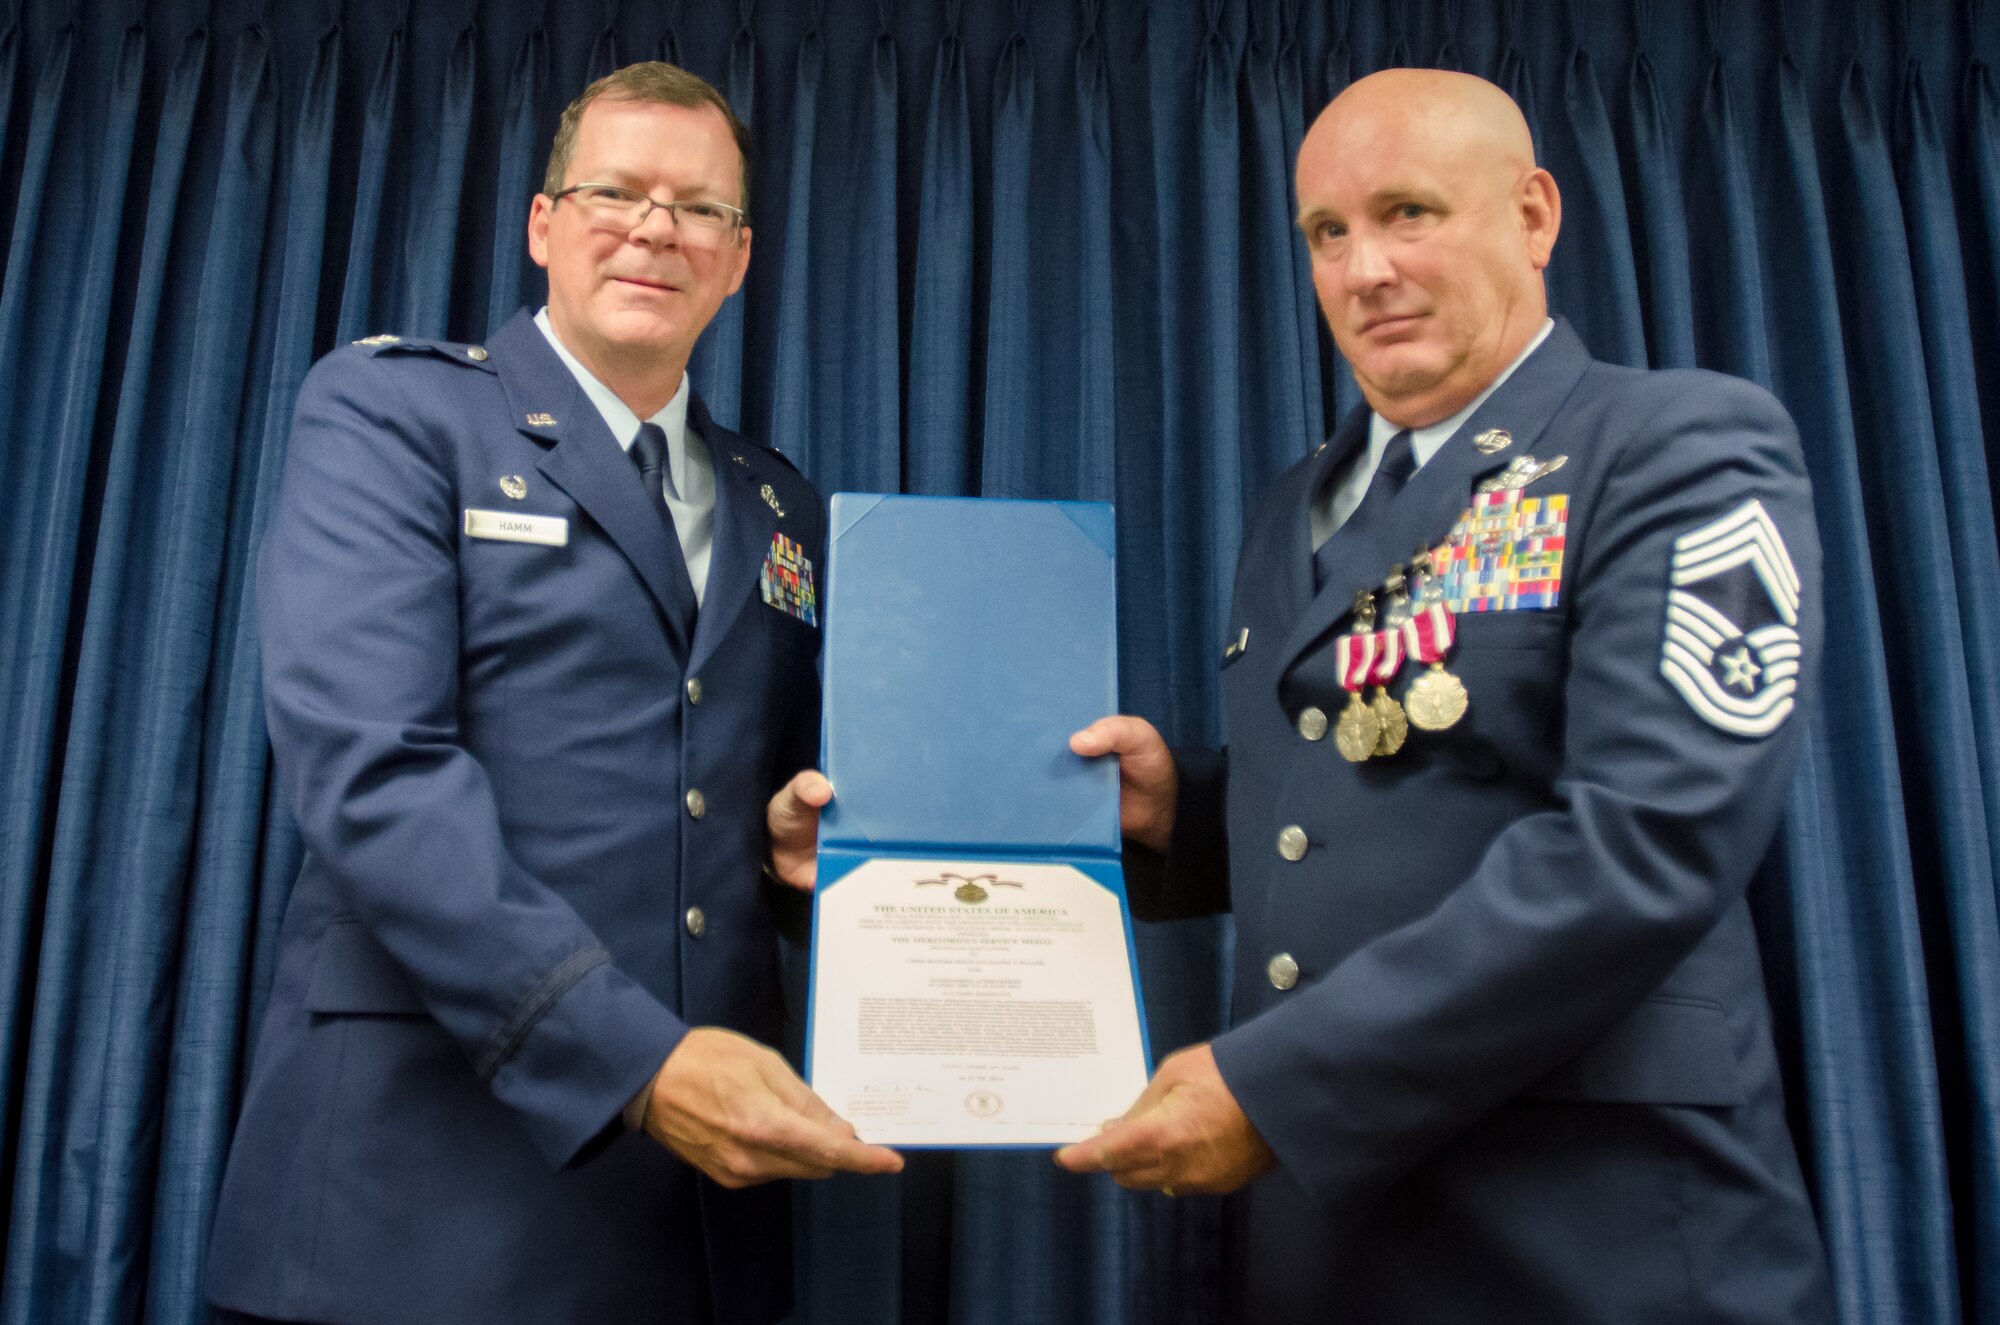 Chief Master Sgt. Daniel Fuller (right), the outgoing superintendent of the Kentucky Air National Guard’s 123rd Operations Group, is awarded the Meritorious Service Medal by Col. Robert Hamm, commander of the Operations Group, during Fuller’s retirement ceremony at the Kentucky Air National Guard Base in Louisville, Ky., June 8, 2014.  Fuller retired after 36 years of service. (U.S. Air National Guard photo by Senior Airman Joshua Horton)